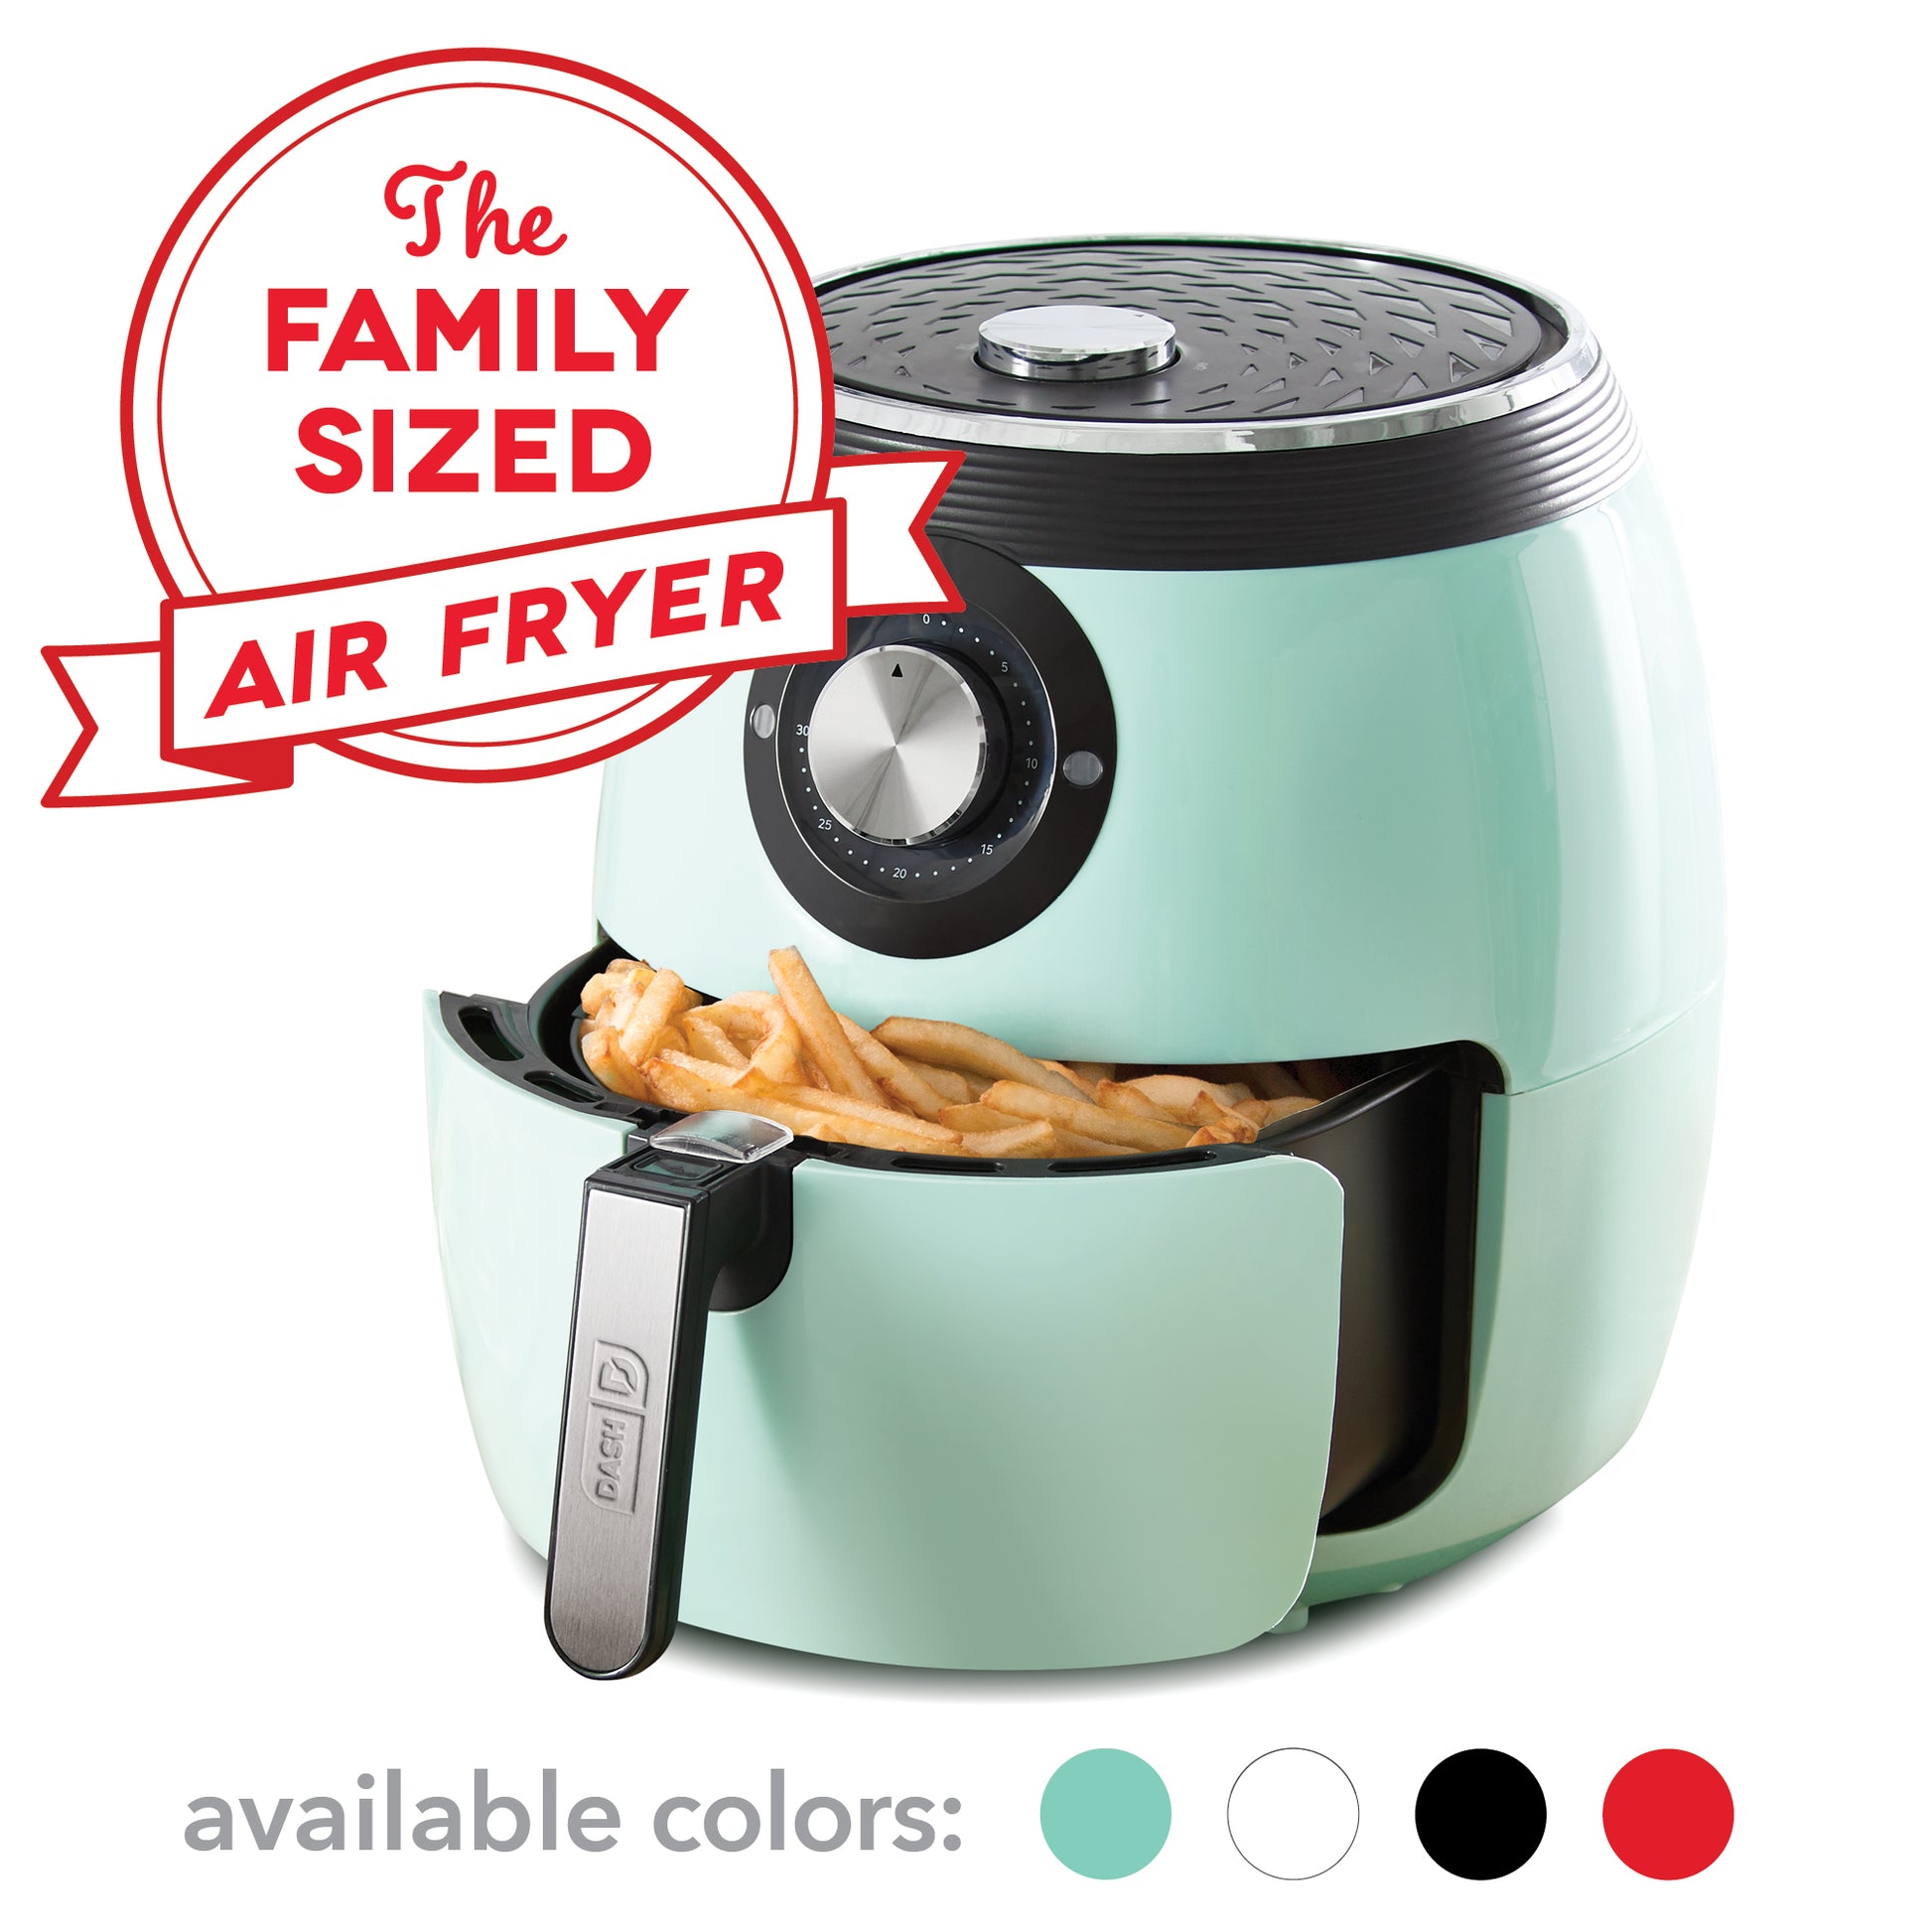 Easy Dinners with the Colorful BELLA Dots Slow Cooker - Review